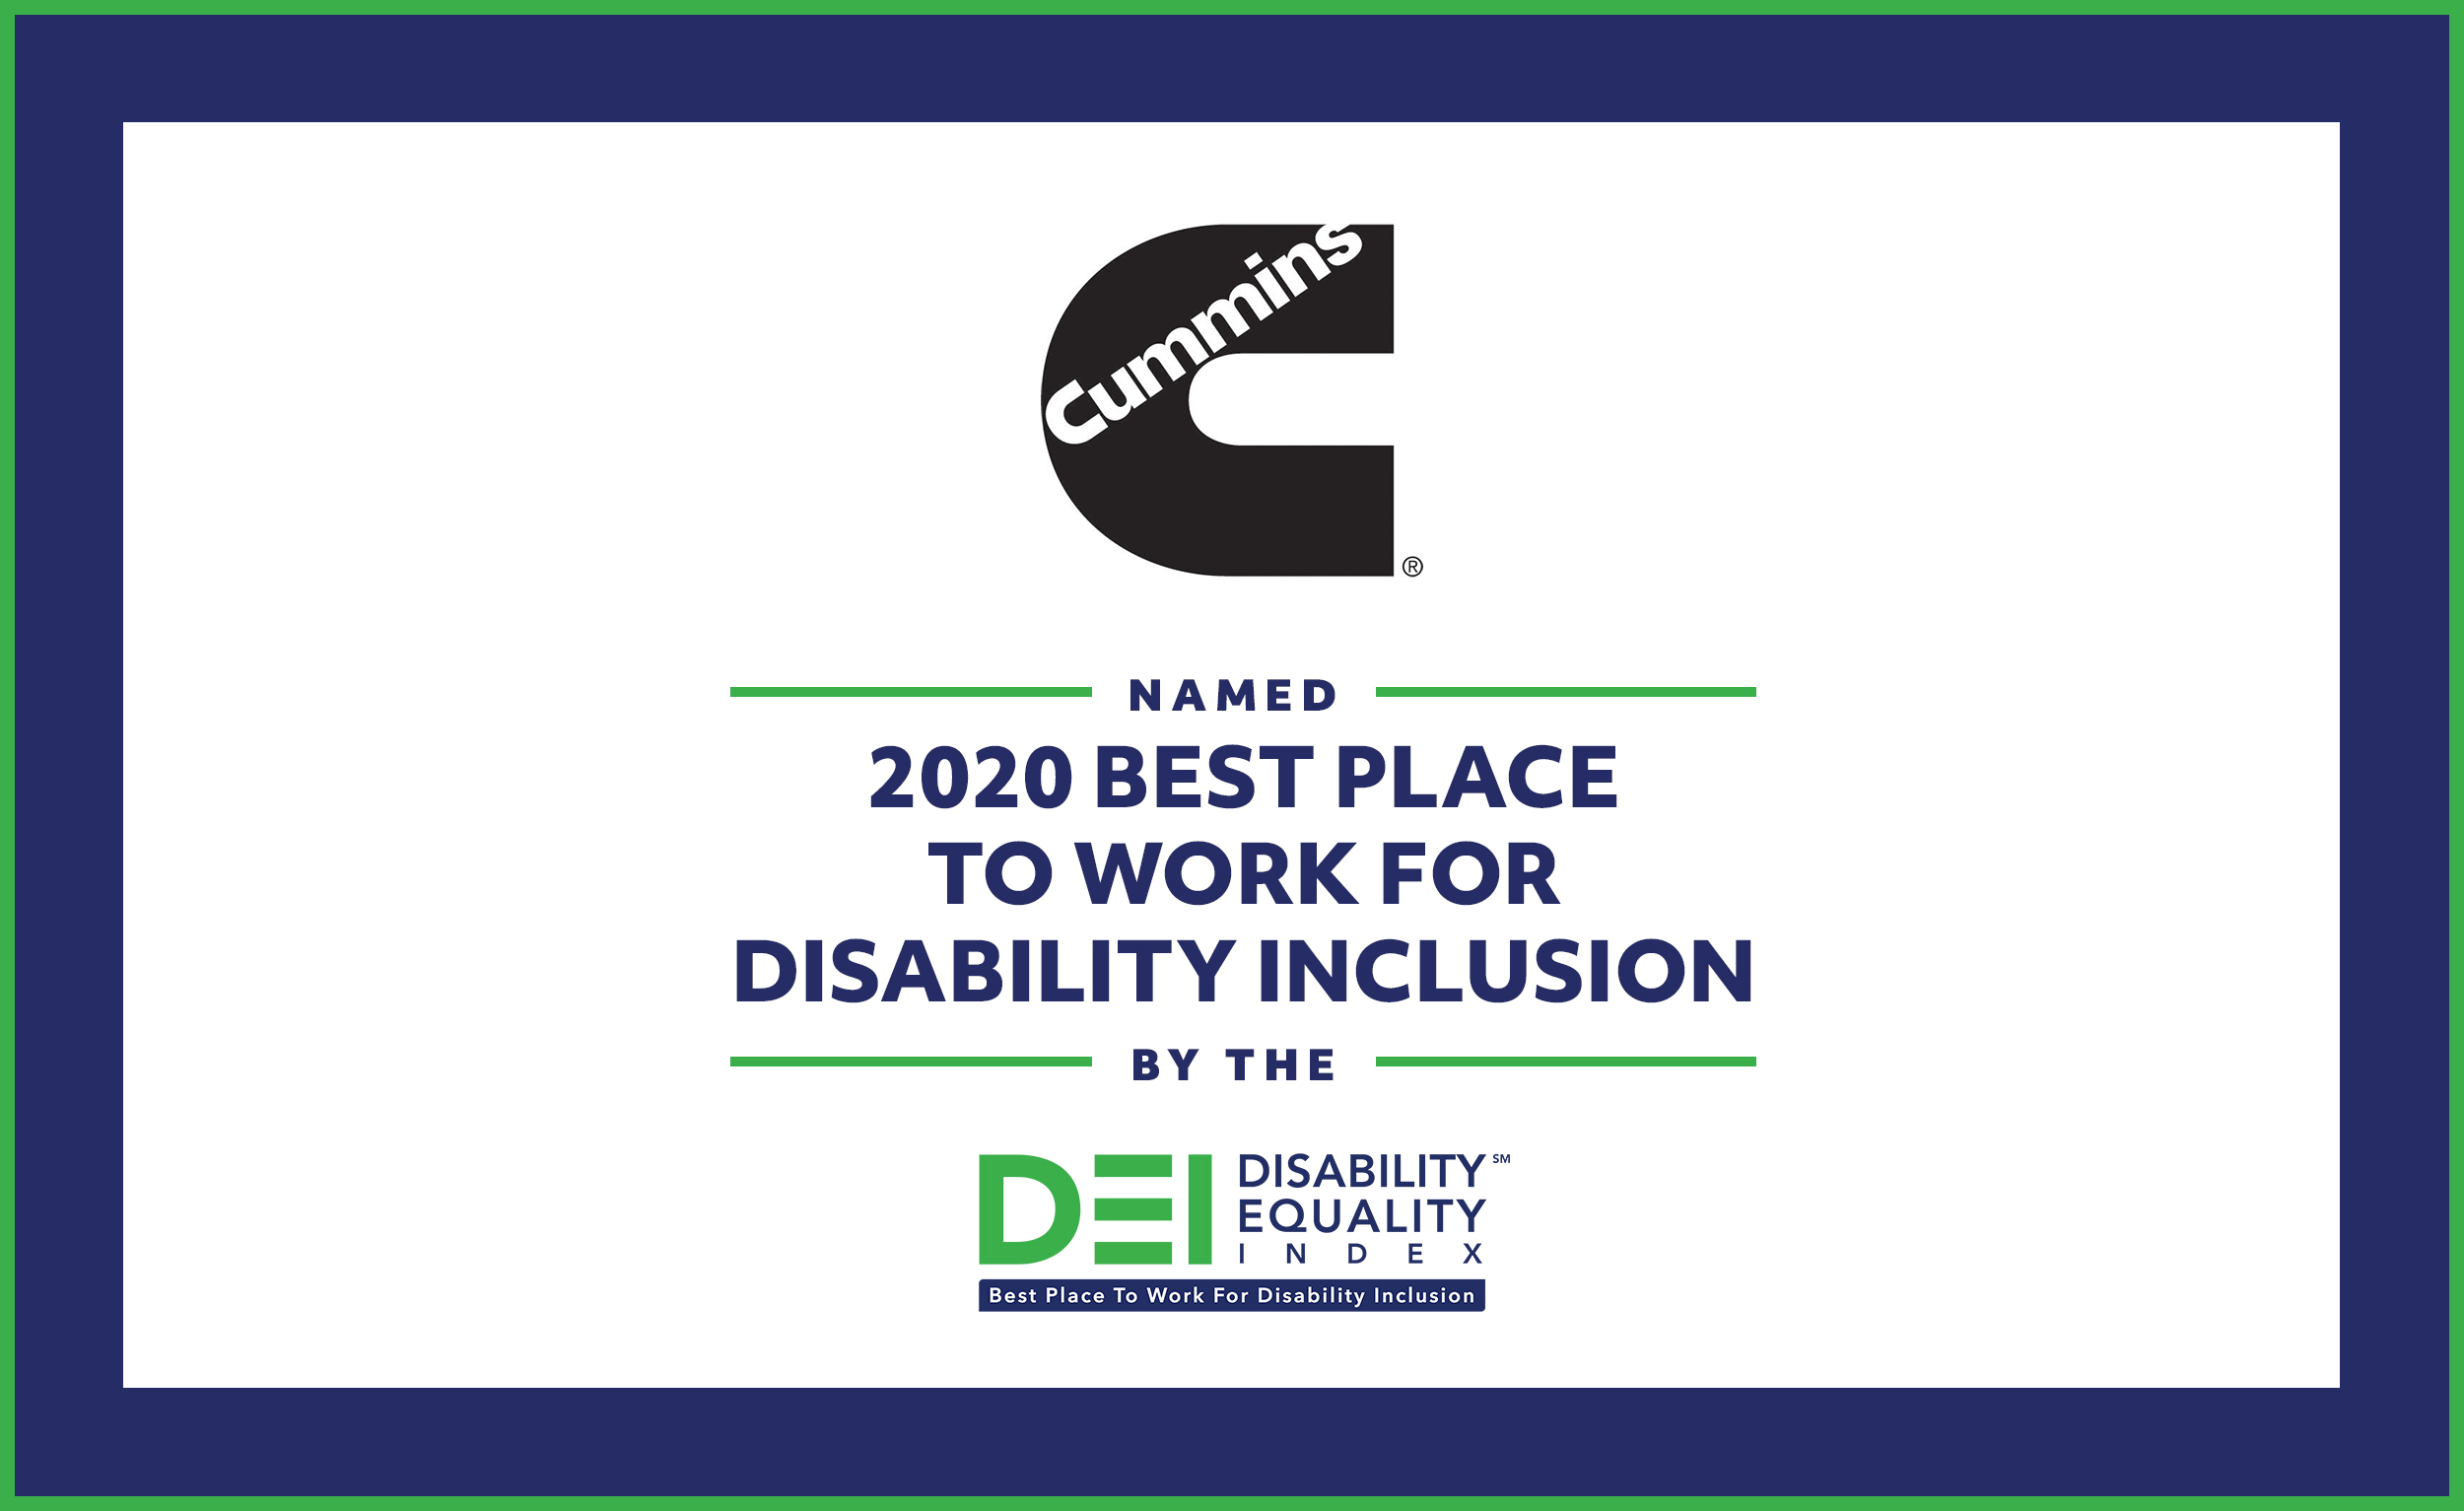 Cummins has been named a Top-Scoring Company on the 2020 Disability Equality Index® (DEI)